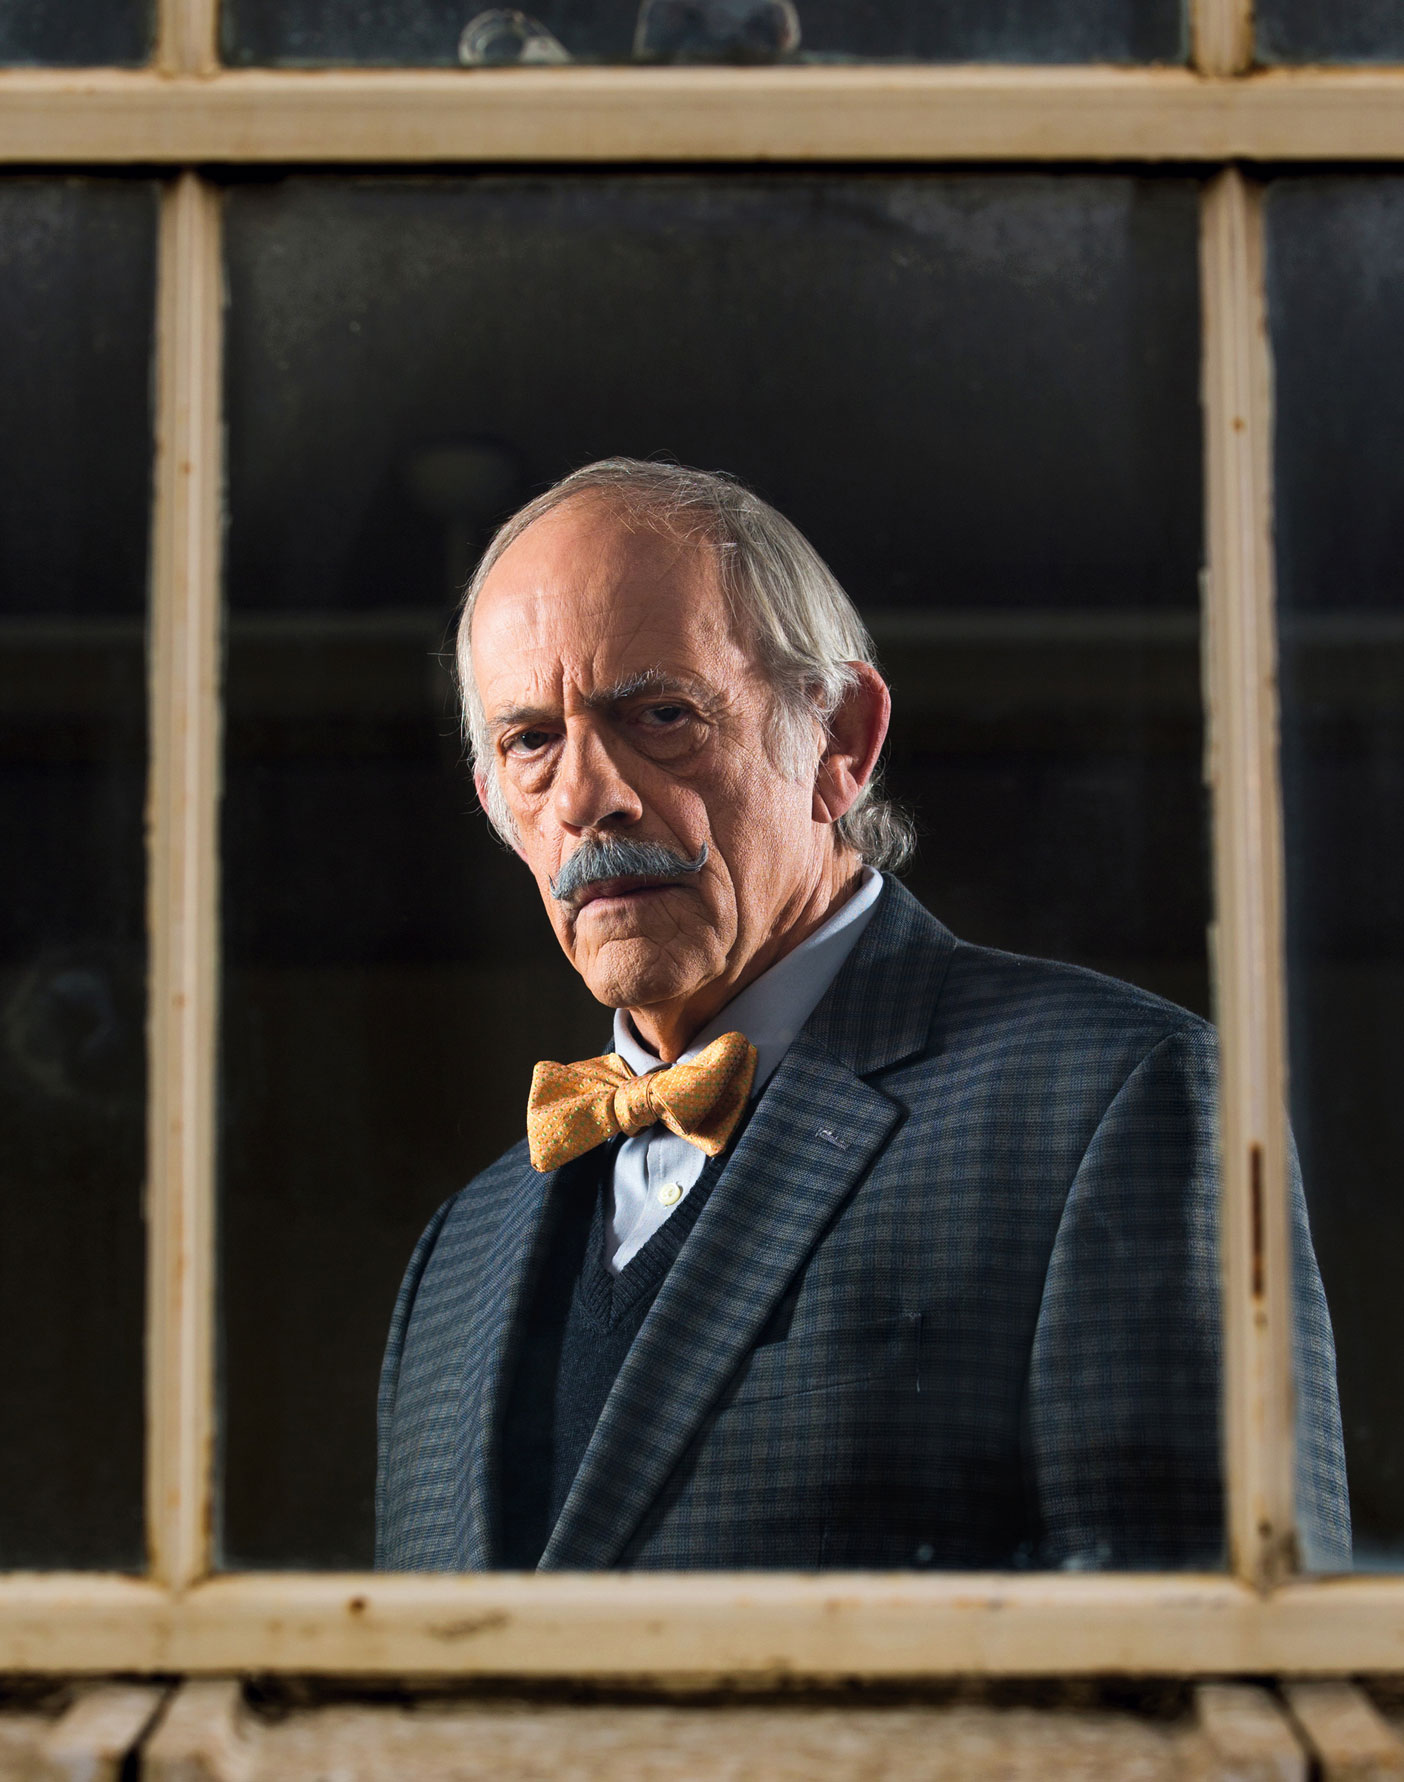 Christopher Lloyd poses as Professor Stanley Hargraves looking through a window